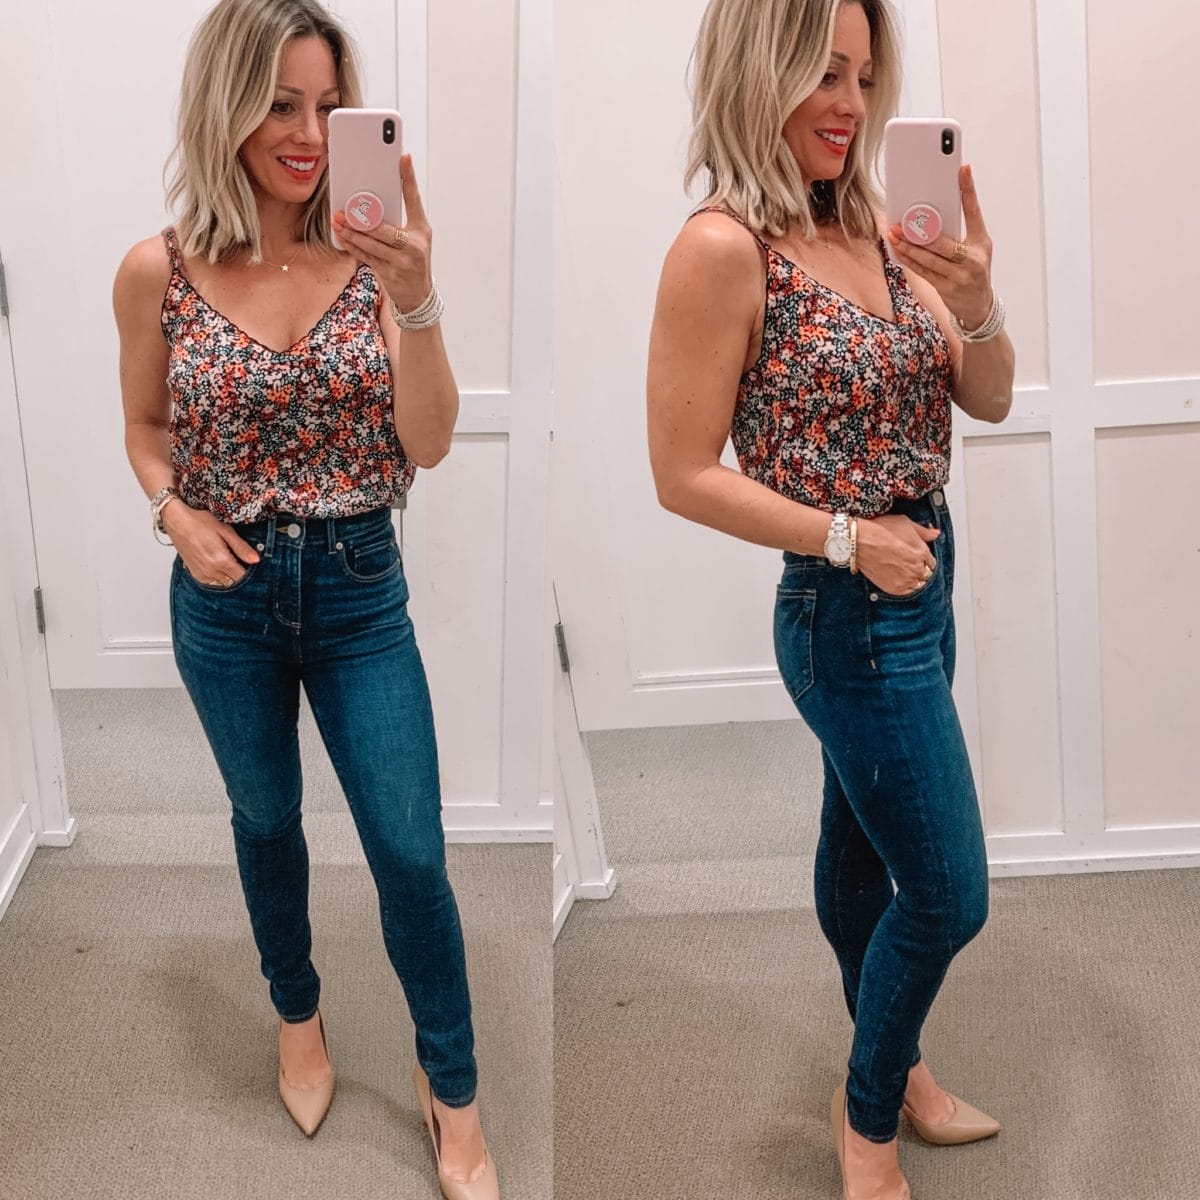 brittany garms recommends Nude In Dressing Room